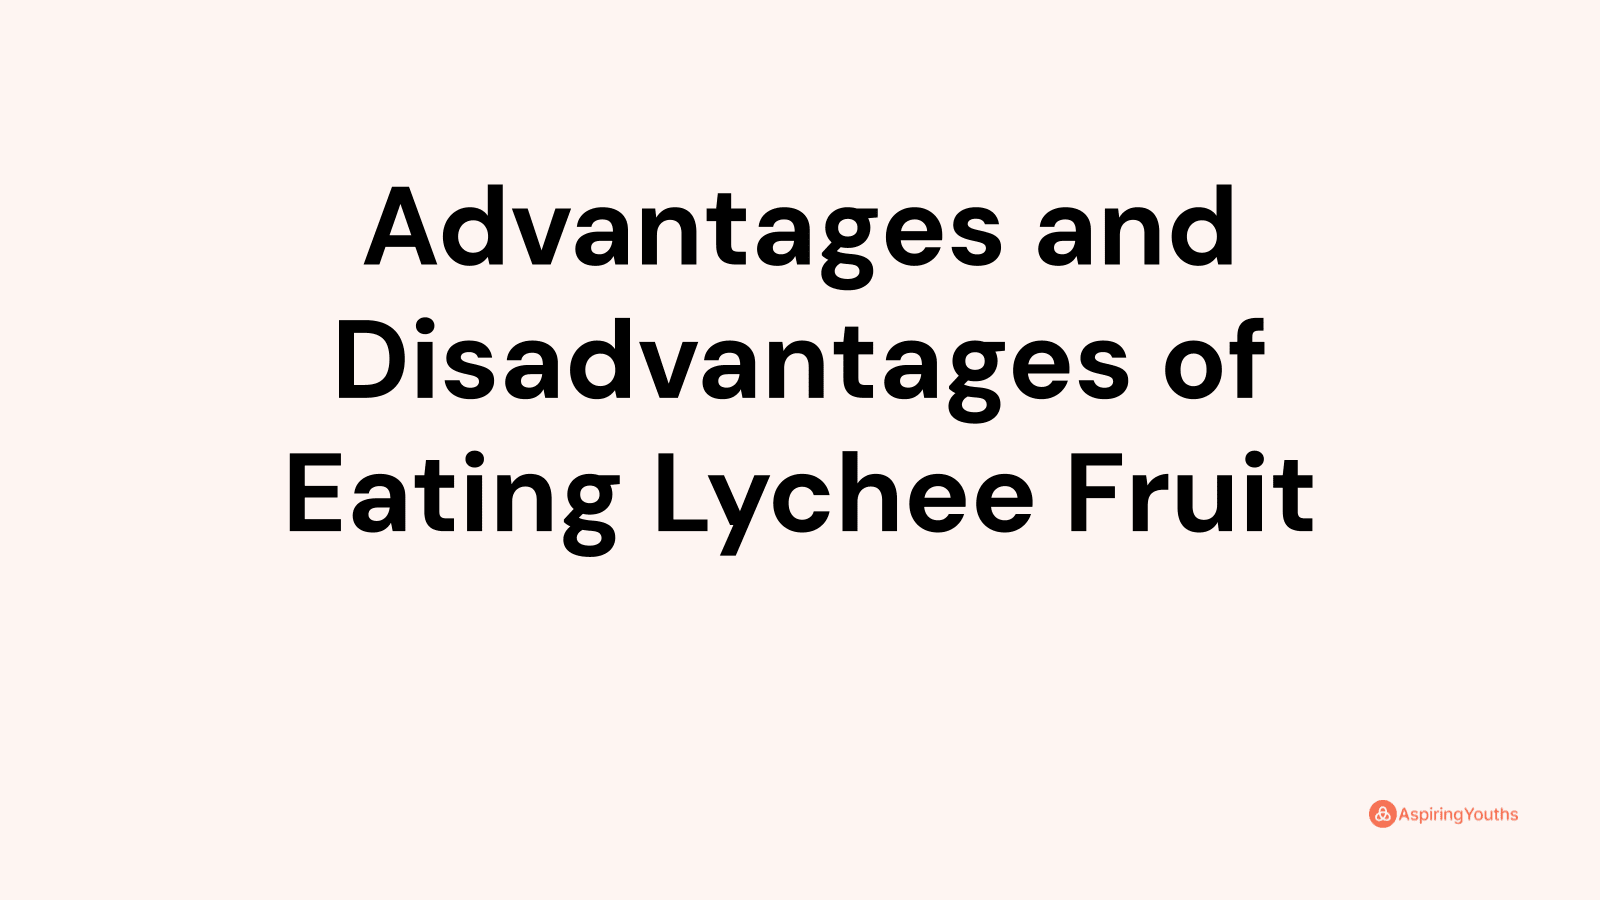 Advantages and disadvantages of Eating Lychee Fruit